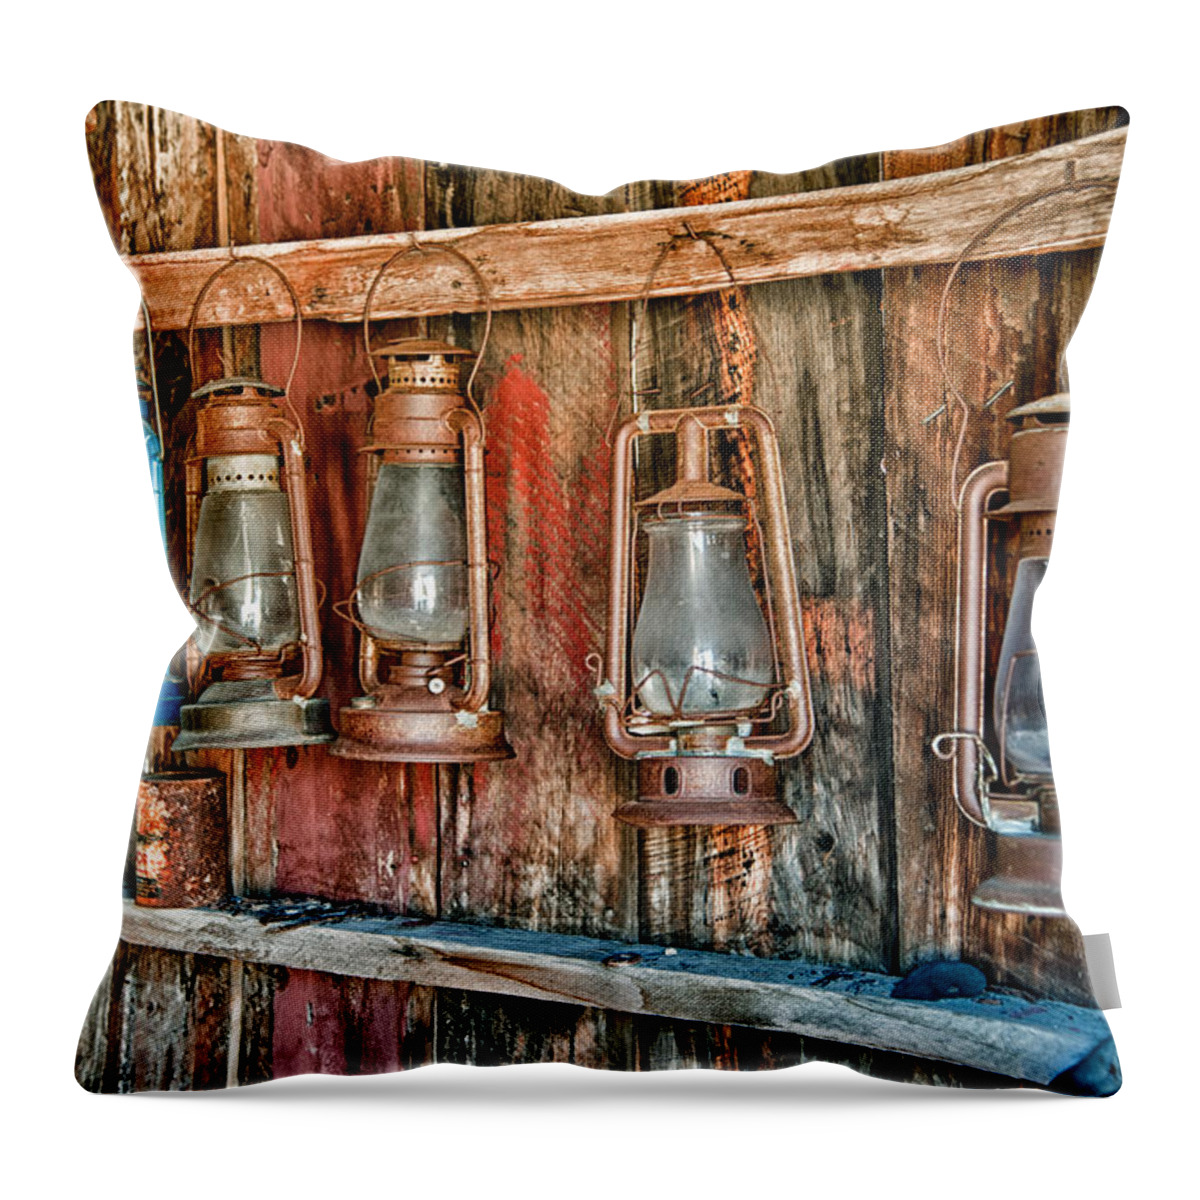 Lanterns Throw Pillow featuring the photograph Lanterns by Cat Connor